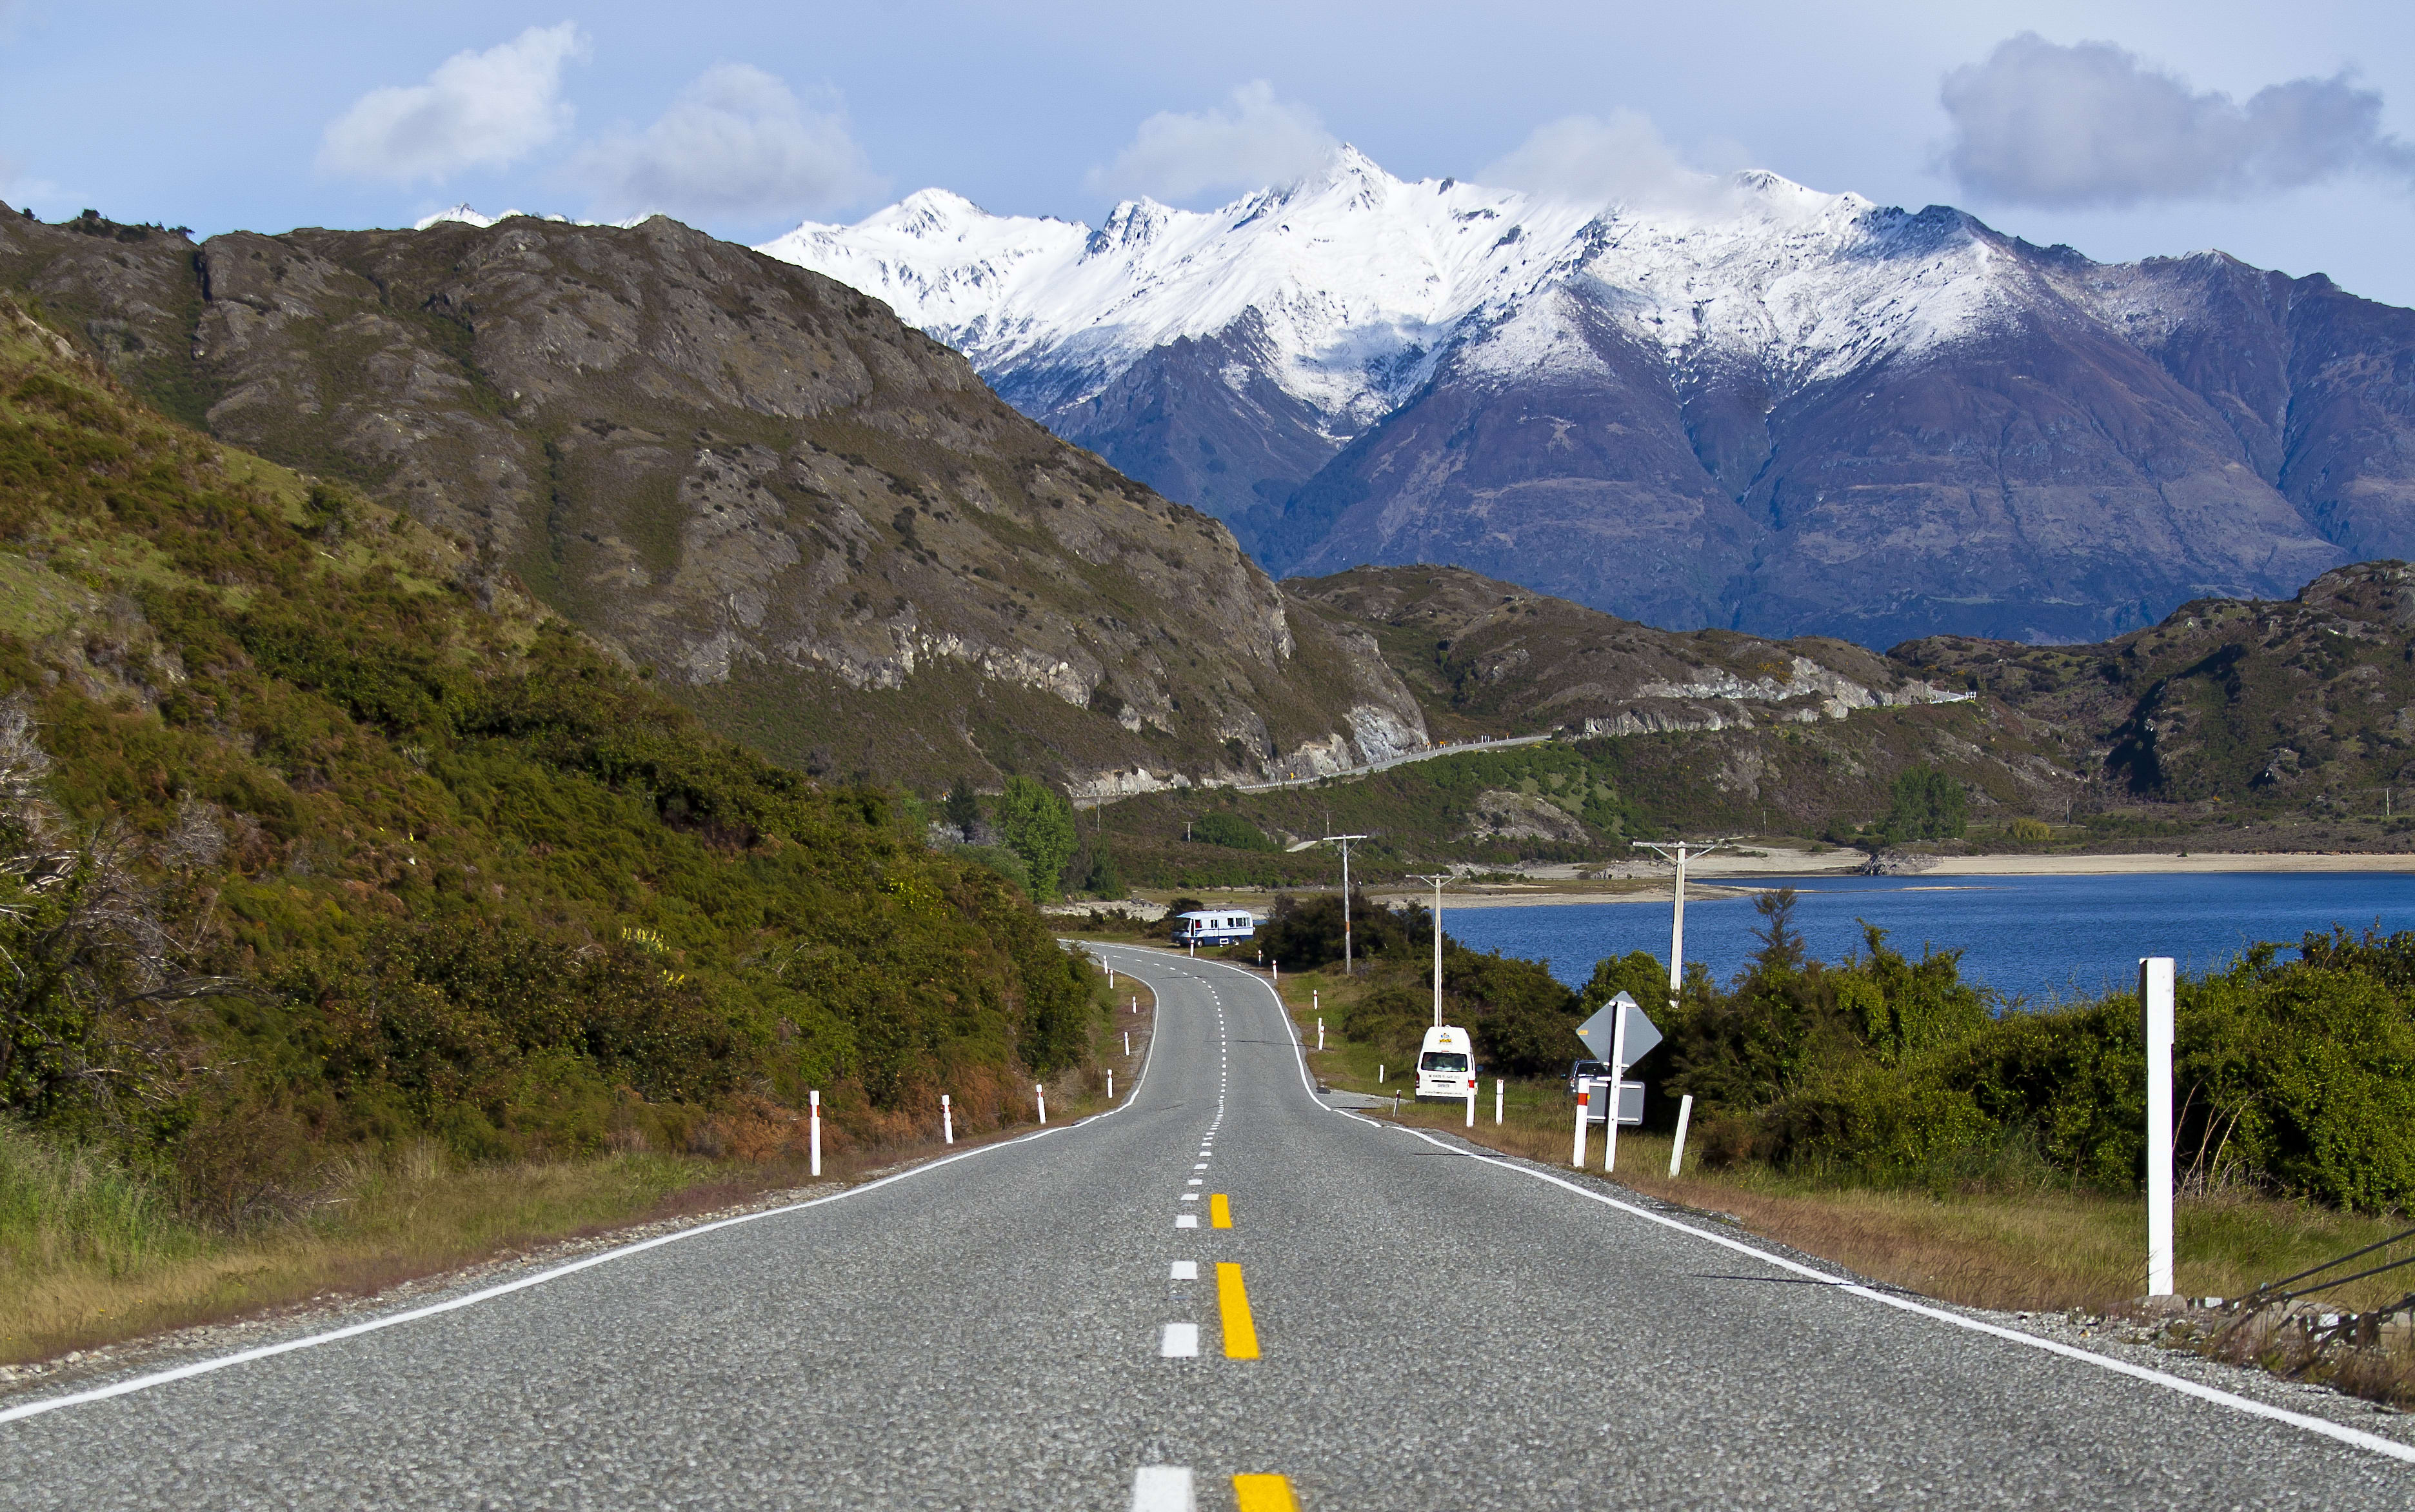 An empty stretch of road in New Zealand's South Island, with mountains and a lake in the background